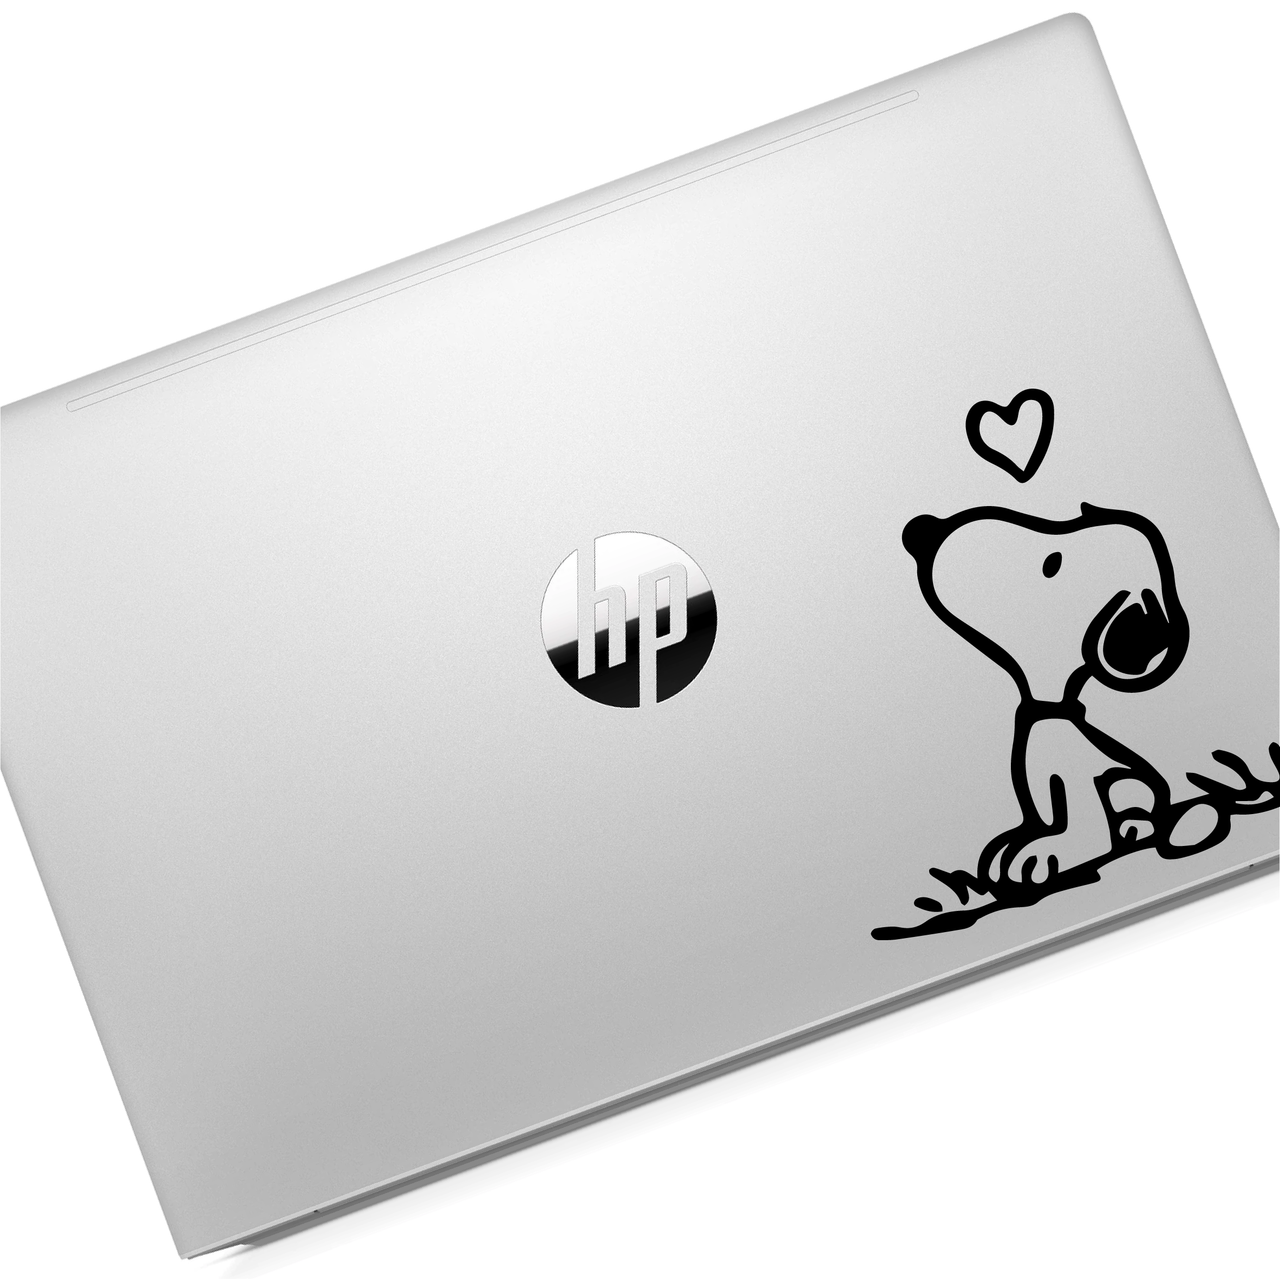 Snoopy Heart Laptop Decal